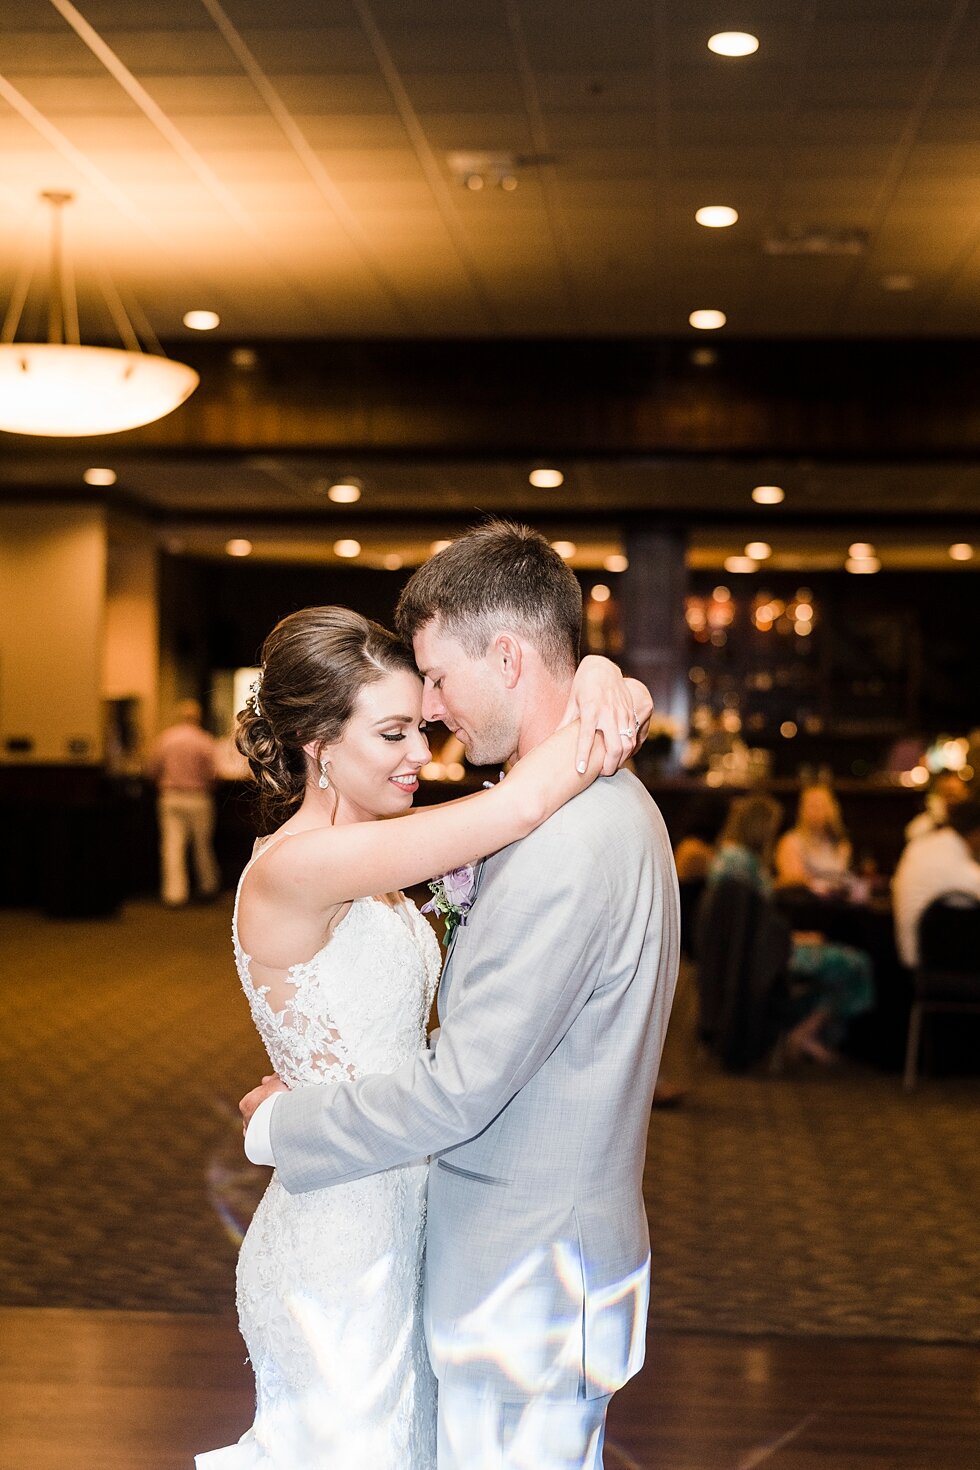  Bride puts her hands around the neck of her new husband as they share their first dance together as husband and wife. wedding ceremony details stunning photography married midwest louisville kentucky #weddingphoto #love #justmarried #midwestphotogra